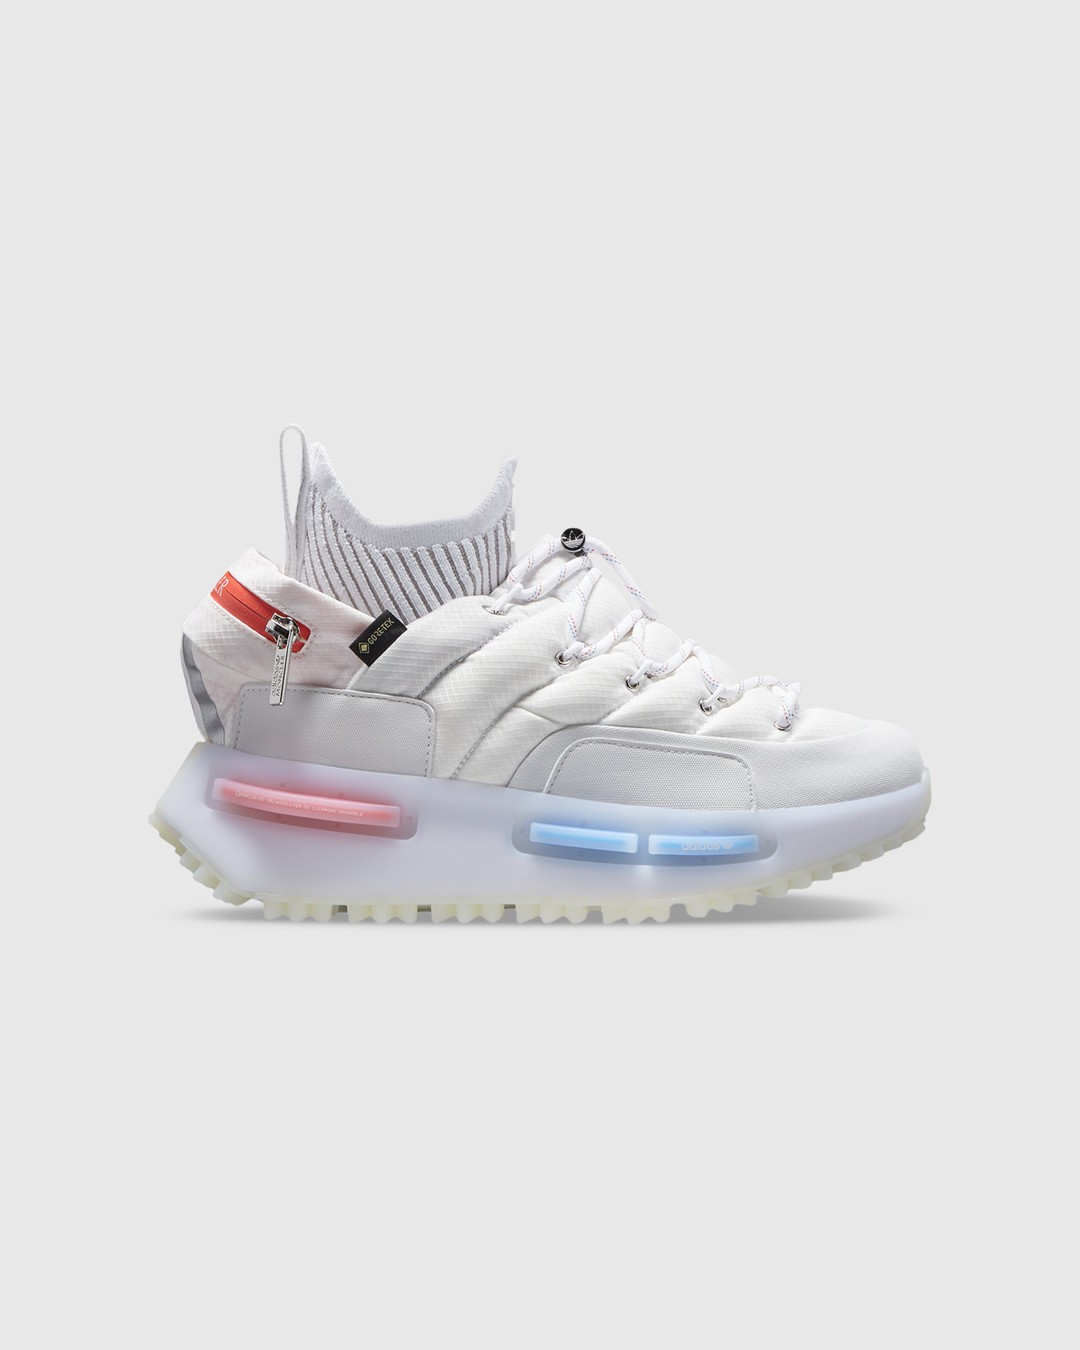 Moncler x adidas Originals – NMD Runner Shoes Core White - Sneakers - White - Image 1